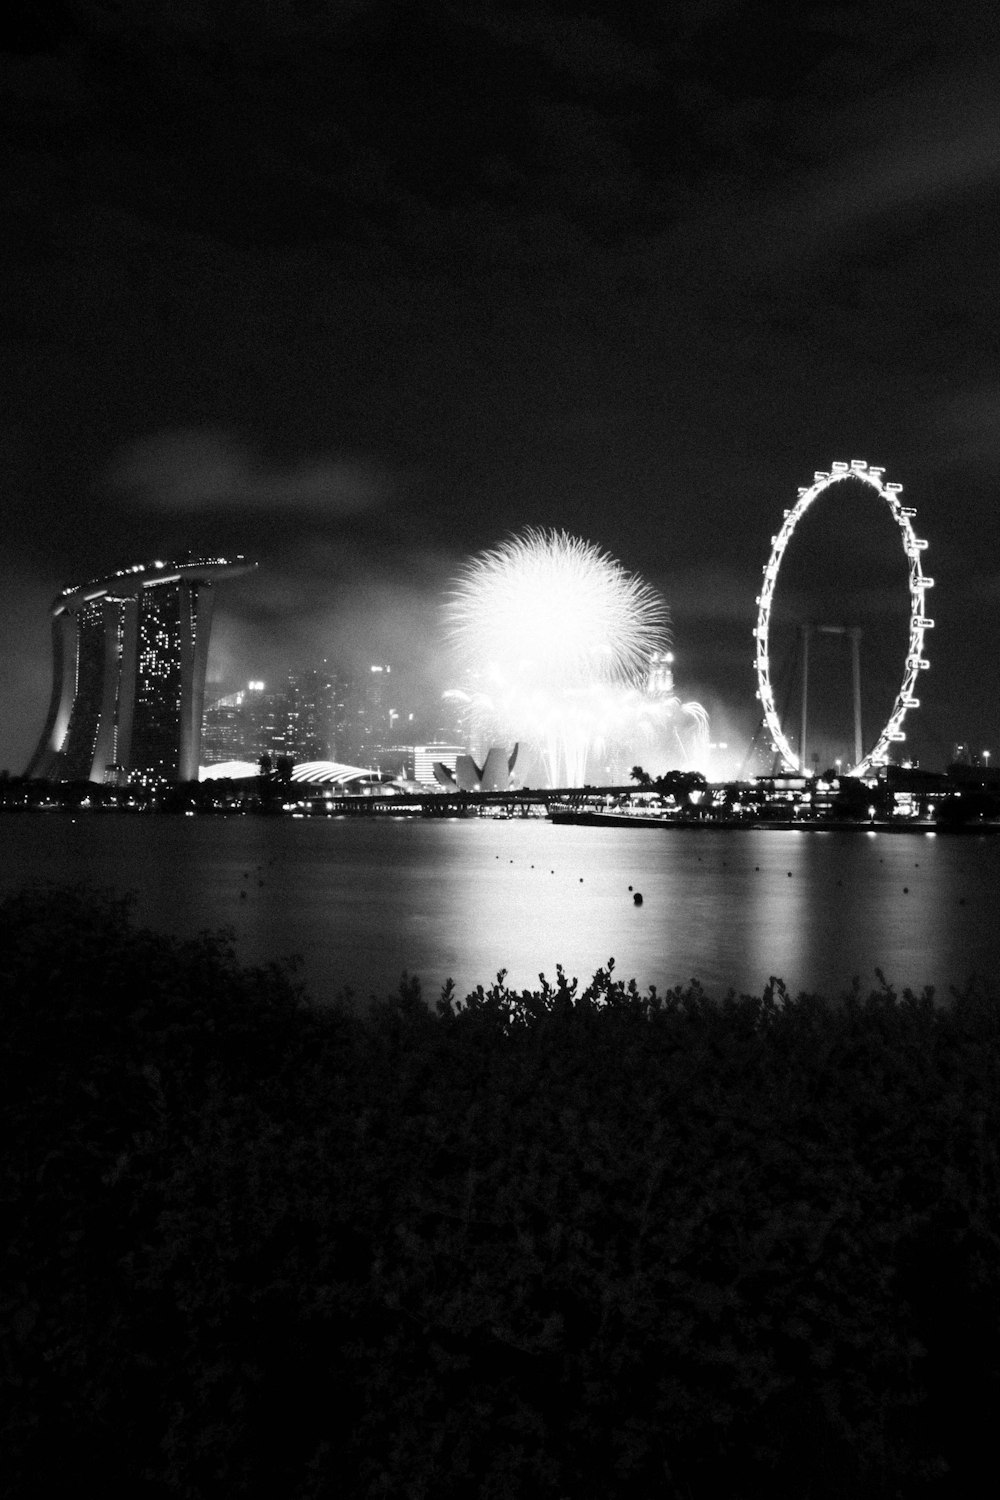 grayscale photo of fireworks display over body of water